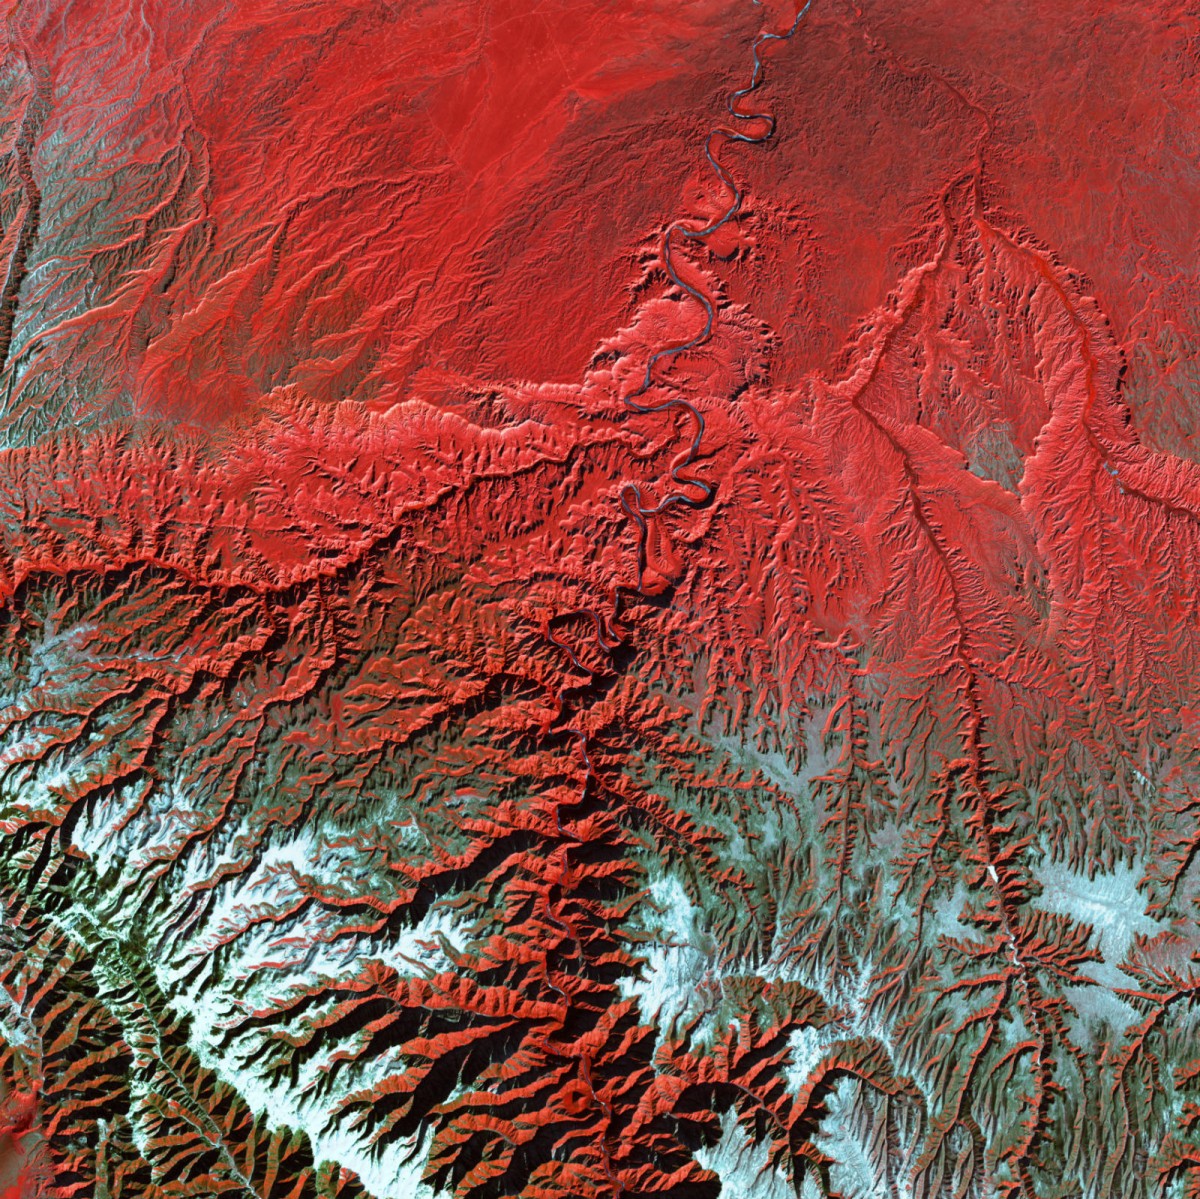 A satellite photo looking down on a red landscape of a mountain range spreading out in jagged lines.